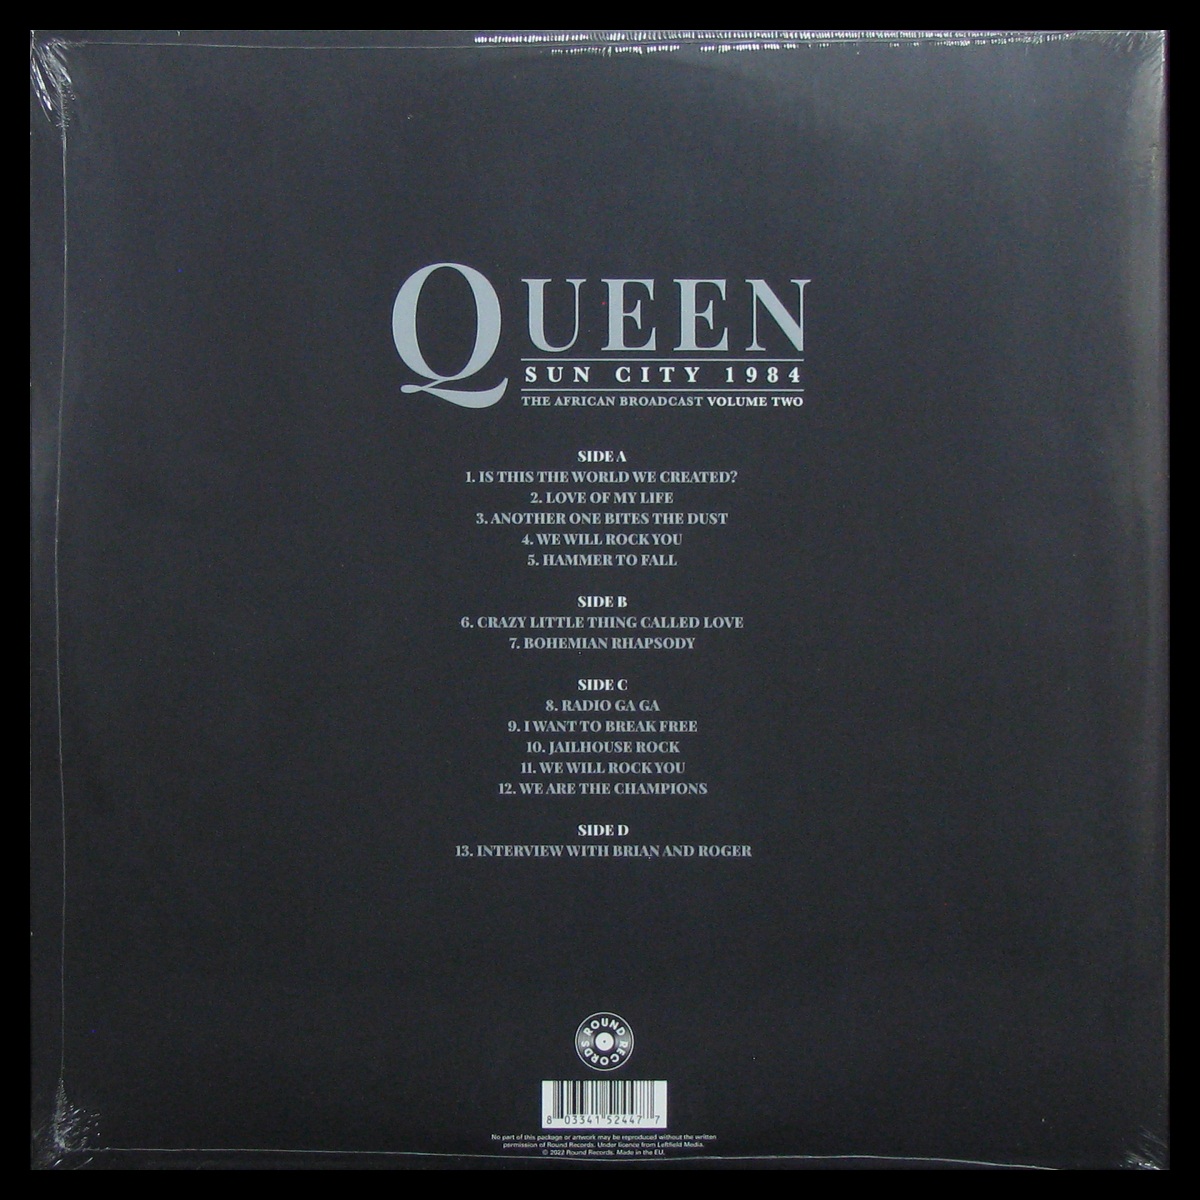 LP Queen — Sun City 1984 - The African Broadcast Volume Two фото 2